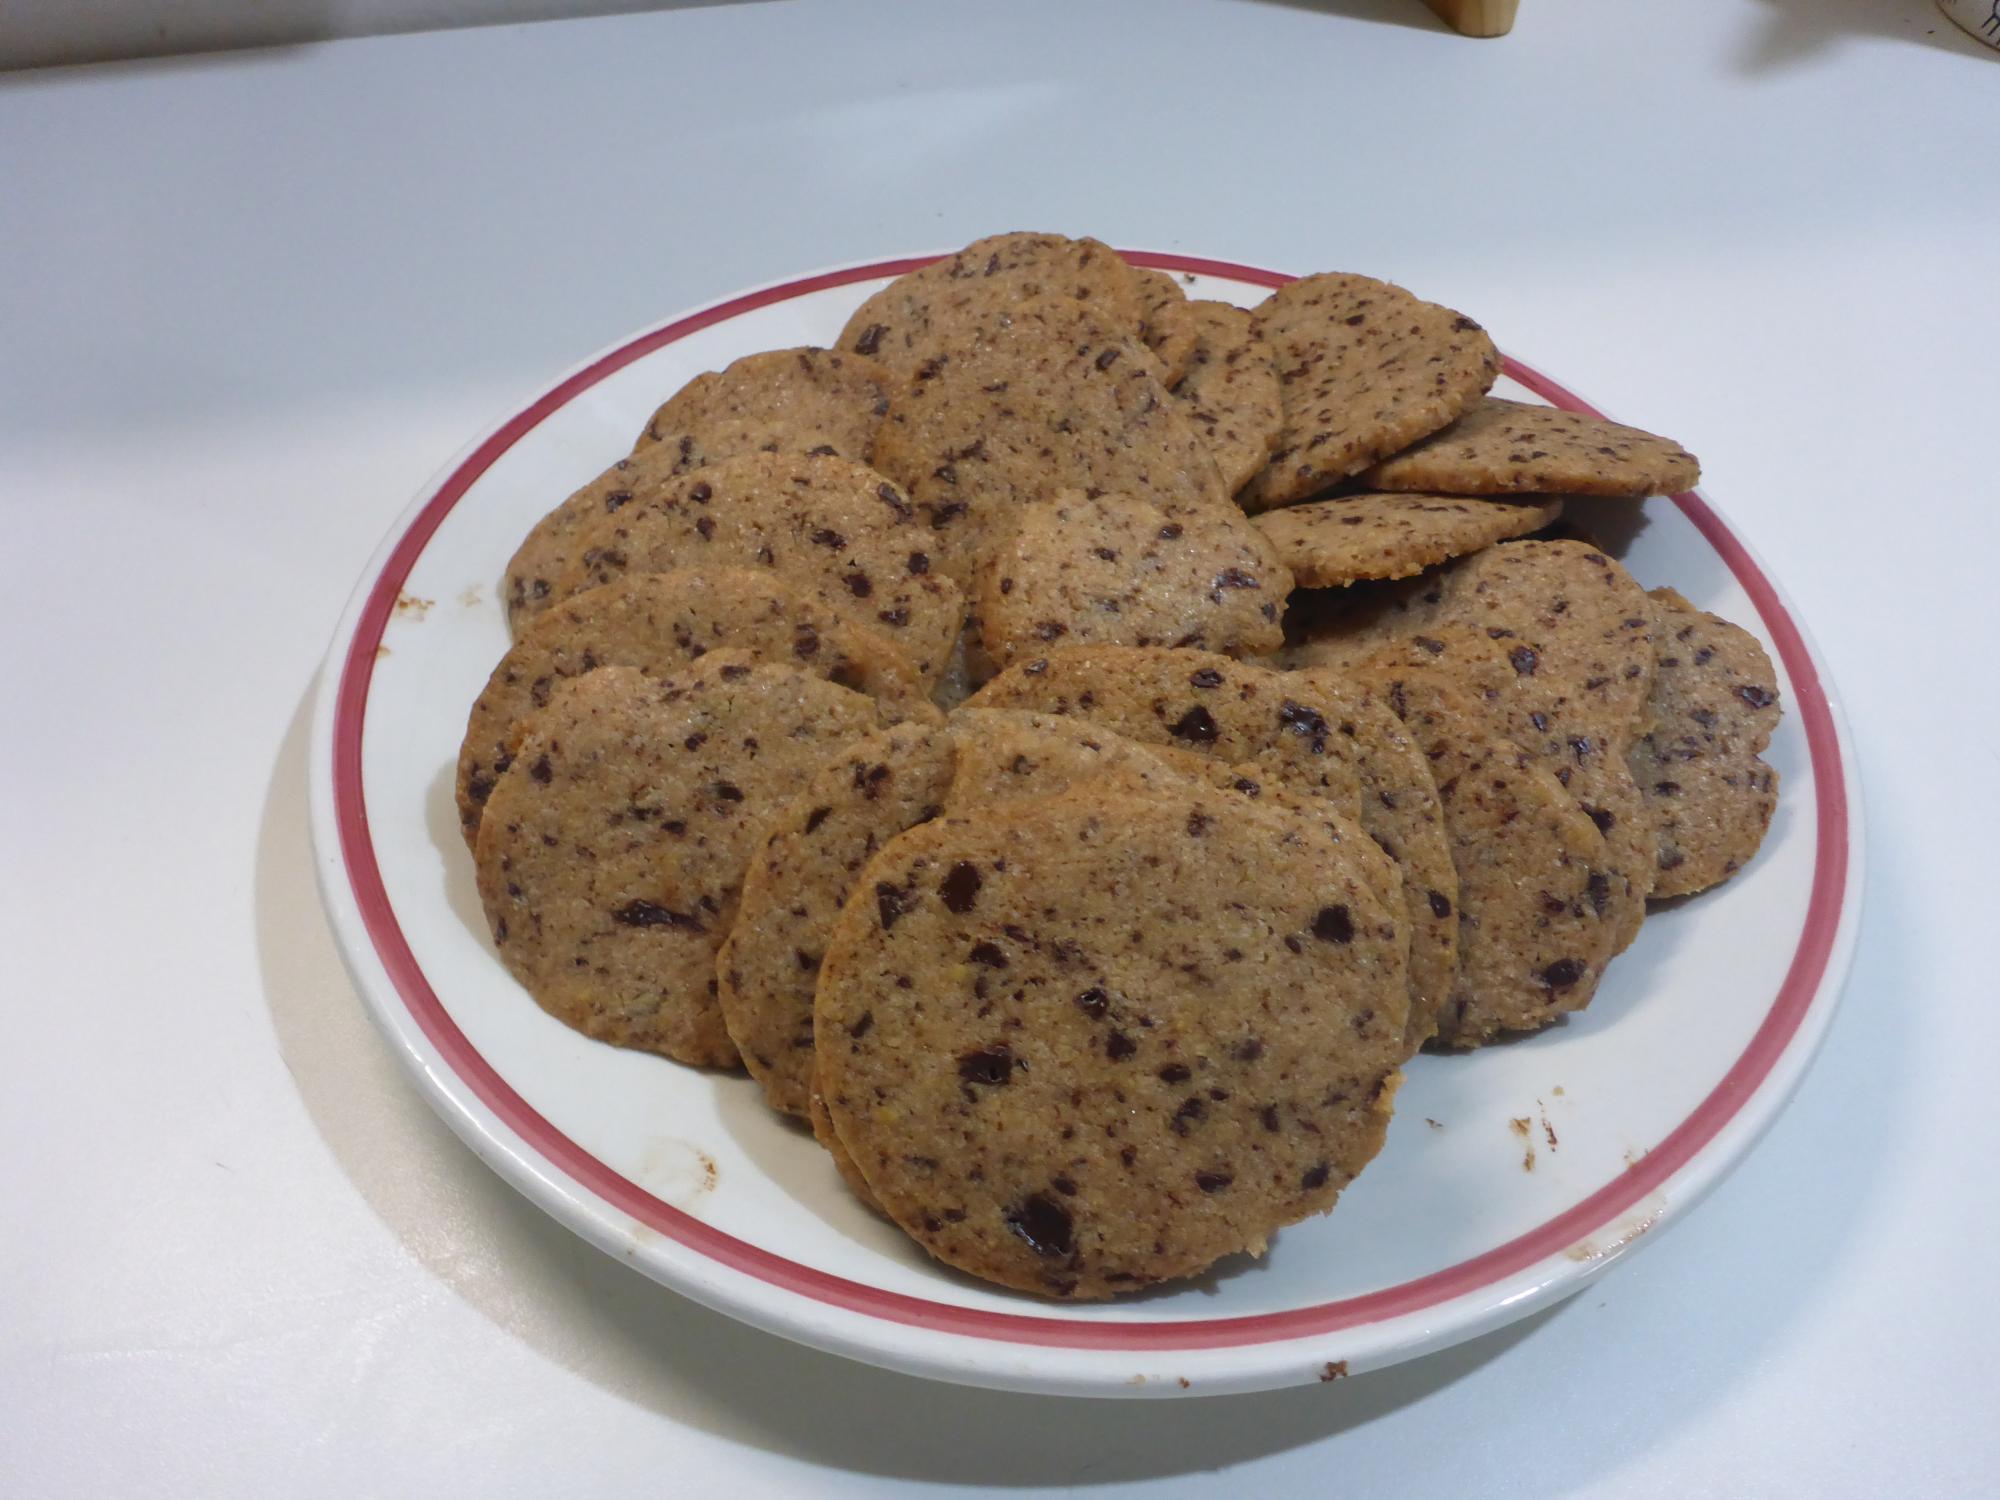 Photo of the baked cookies on a plate